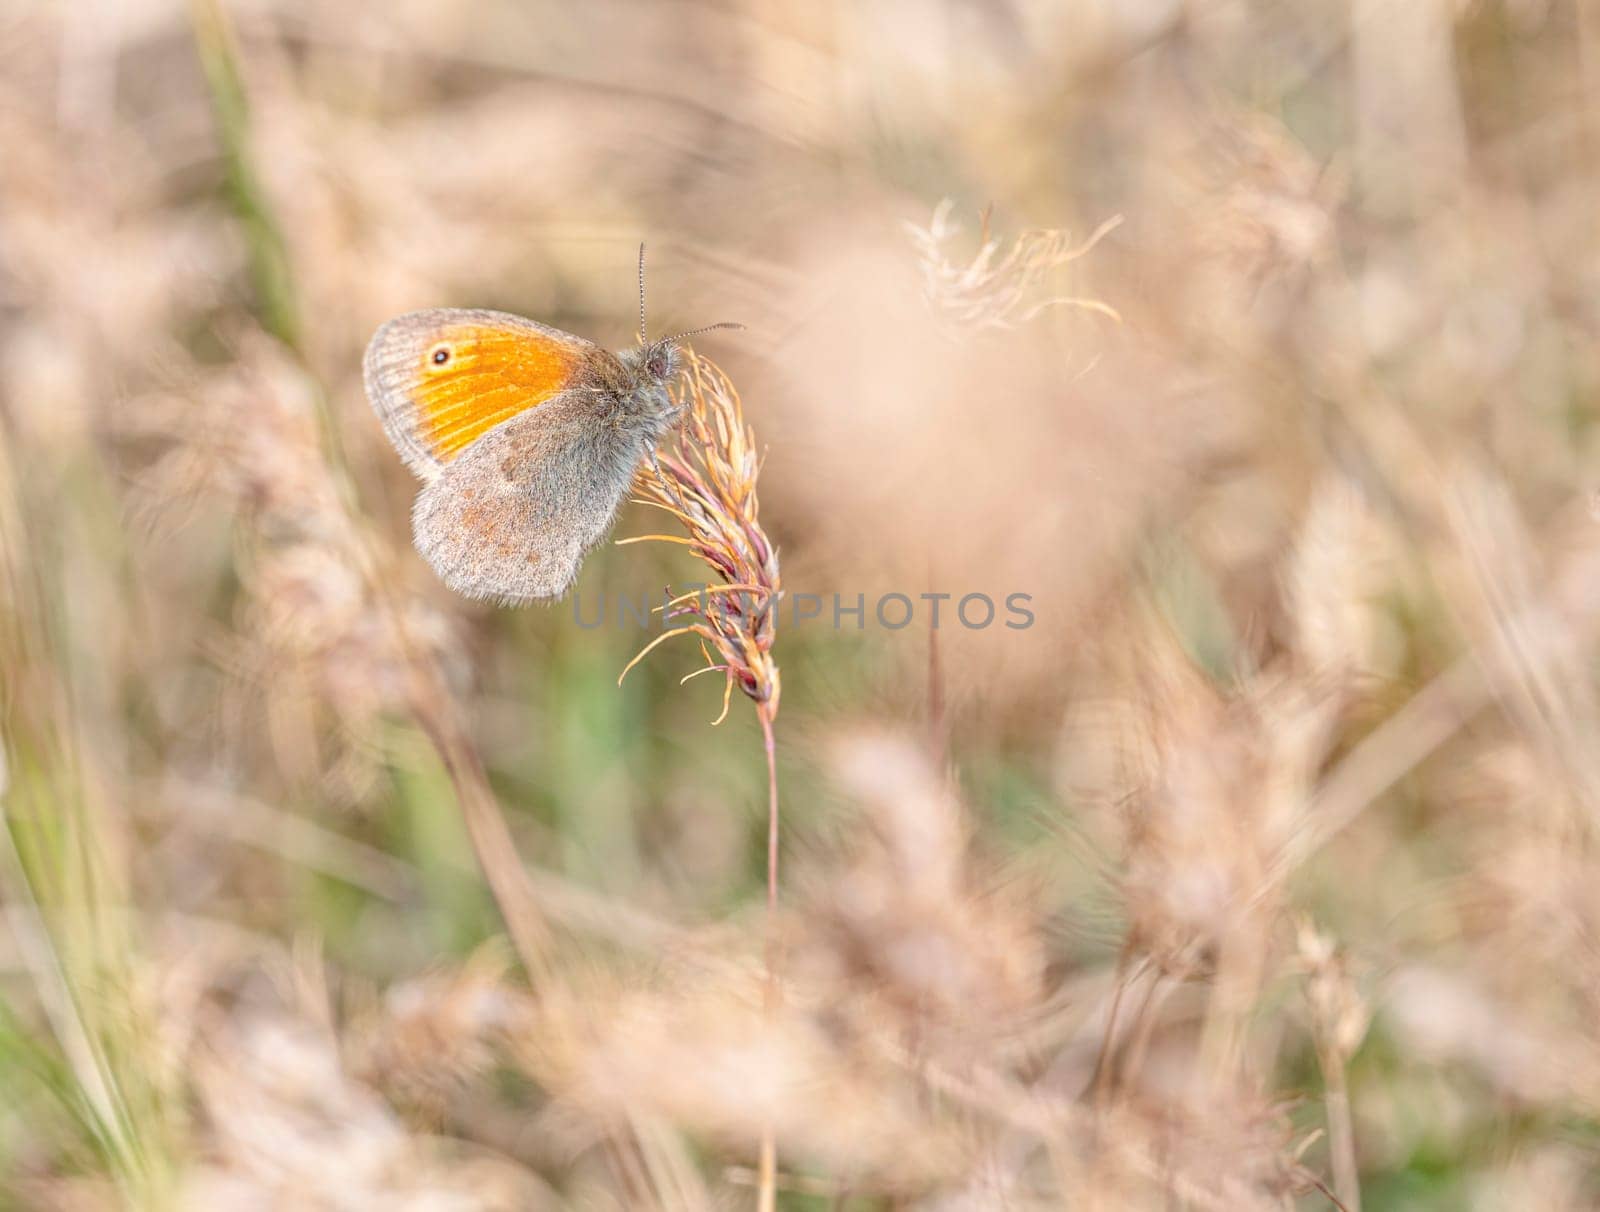 Small heath butterfly, coenonympha pamphilus, on a plant by Elenaphotos21